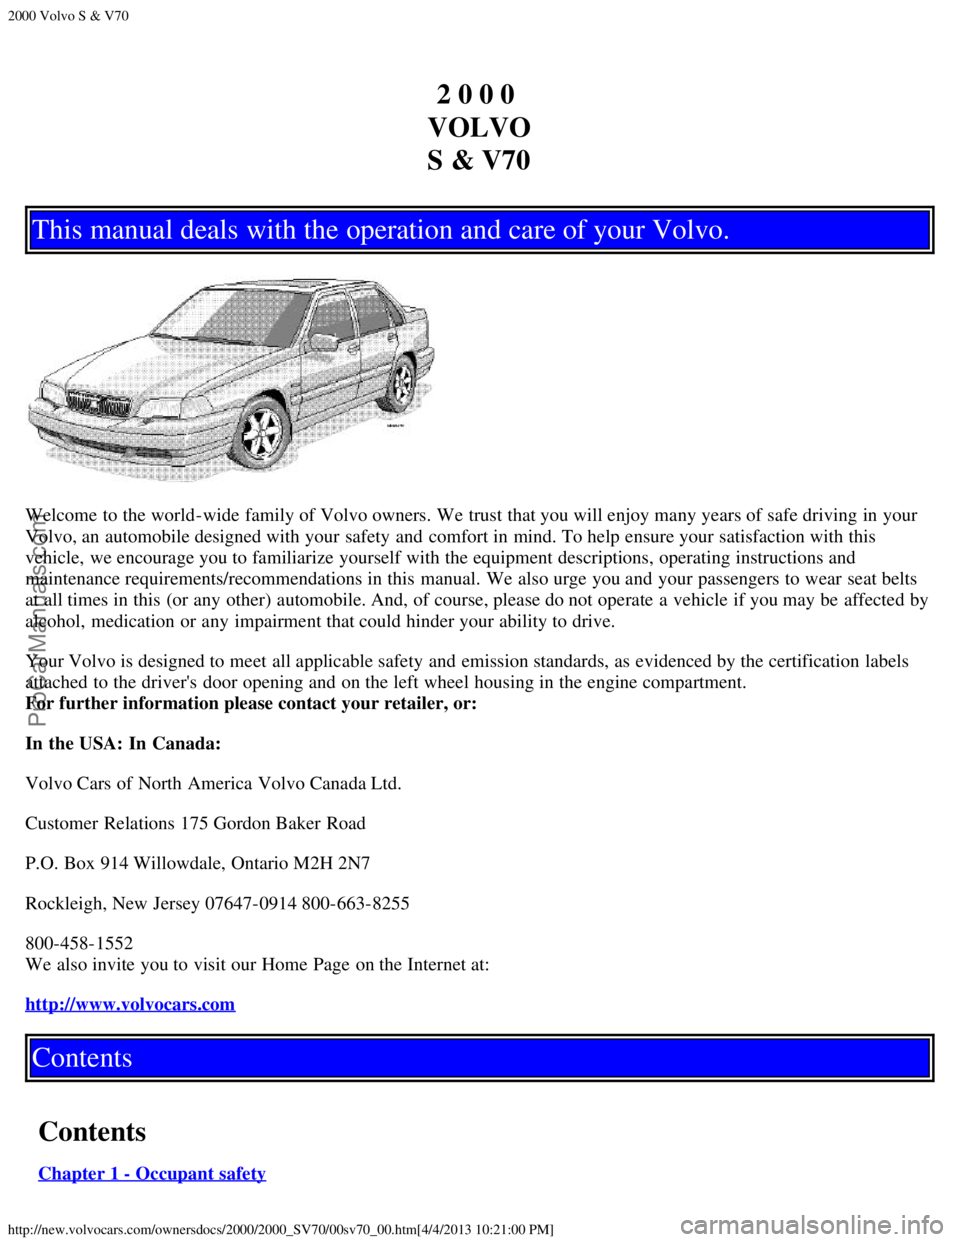 VOLVO V70 2000  Owners Manual 2000 Volvo S & V70
http://new.volvocars.com/ownersdocs/2000/2000_SV70/00sv70_00.htm[4/4/2013 10:21:00 PM]
2 0 0 0 
VOLVO
S & V70
This manual deals with the operation and care of your Volvo.
Welcome to